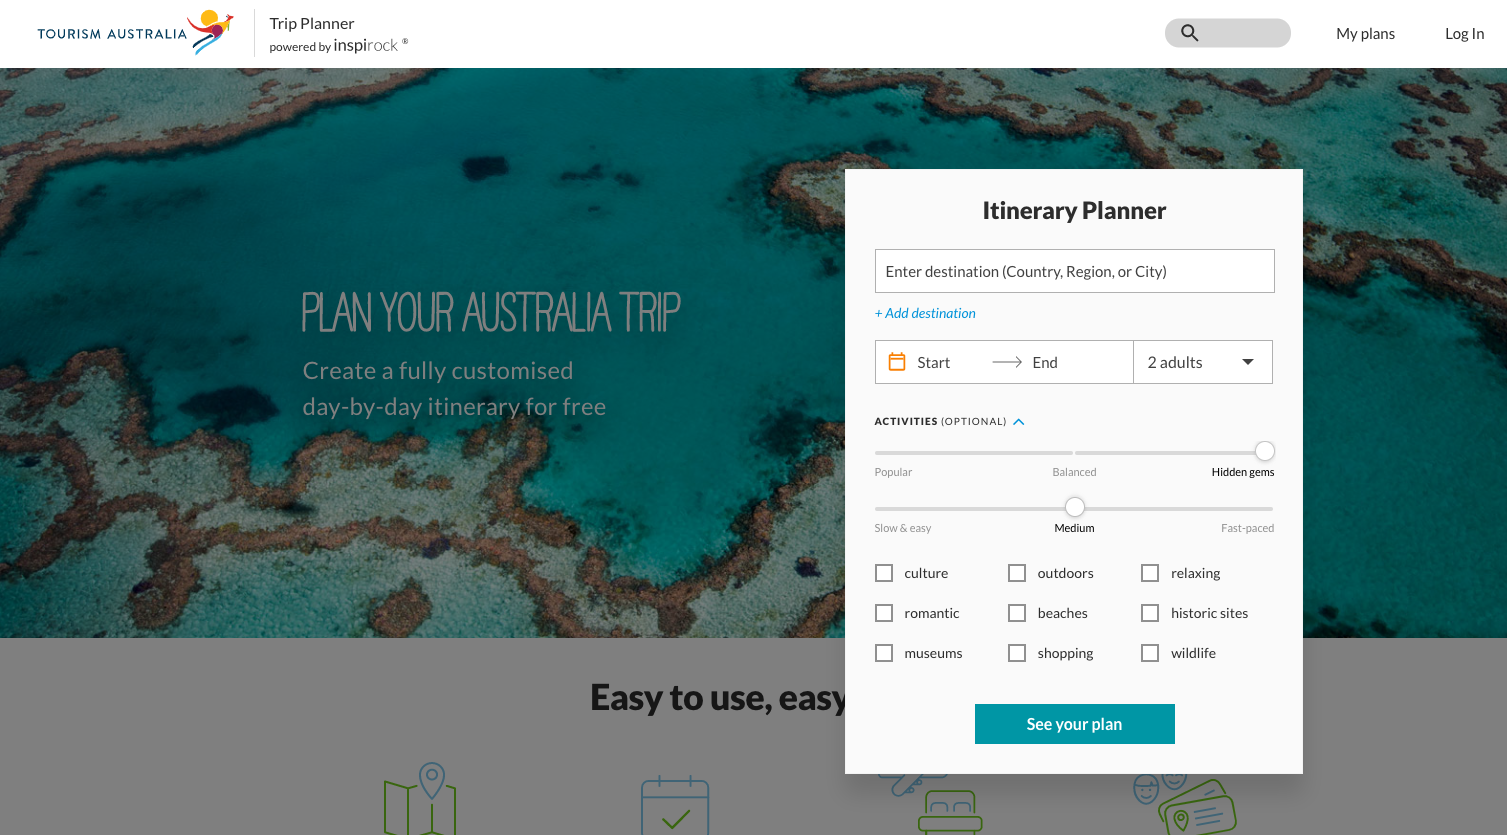 Trip Planner Australia offers visitors to choose their personal mix of attractions and experiences.